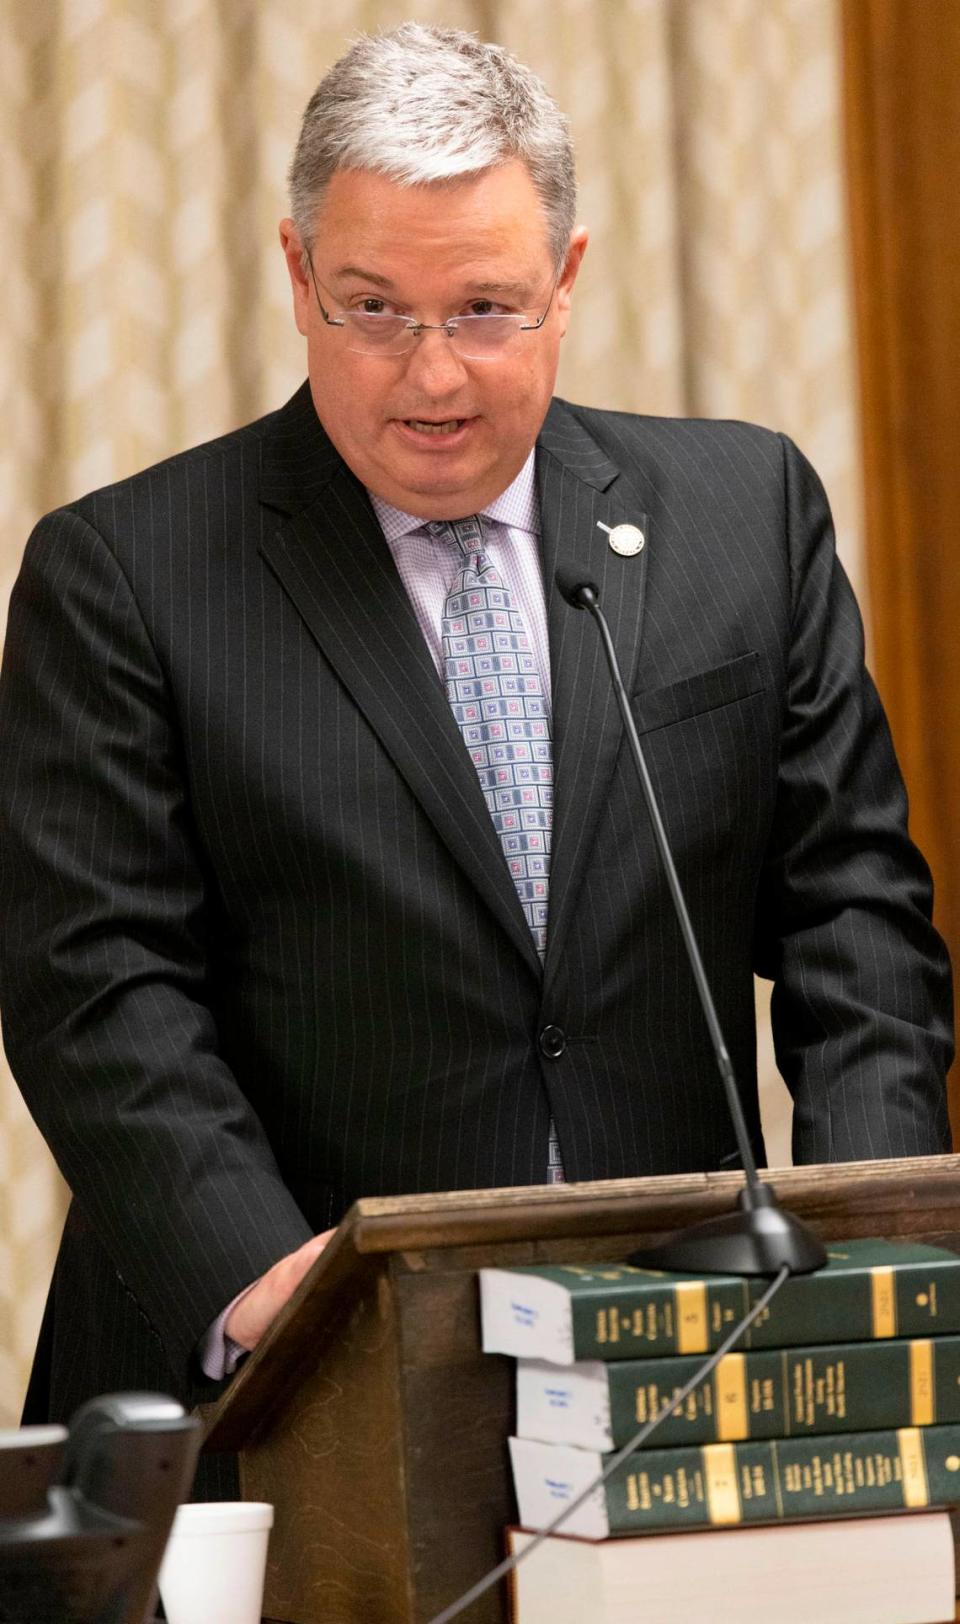 Senator Jim Perry addresses the House Judiciary 1 Committee during their meeting on sports betting legislation on Tuesday, June 21, 2022 in Raleigh, N.C. Perry is the sponsor of the betting legislation.